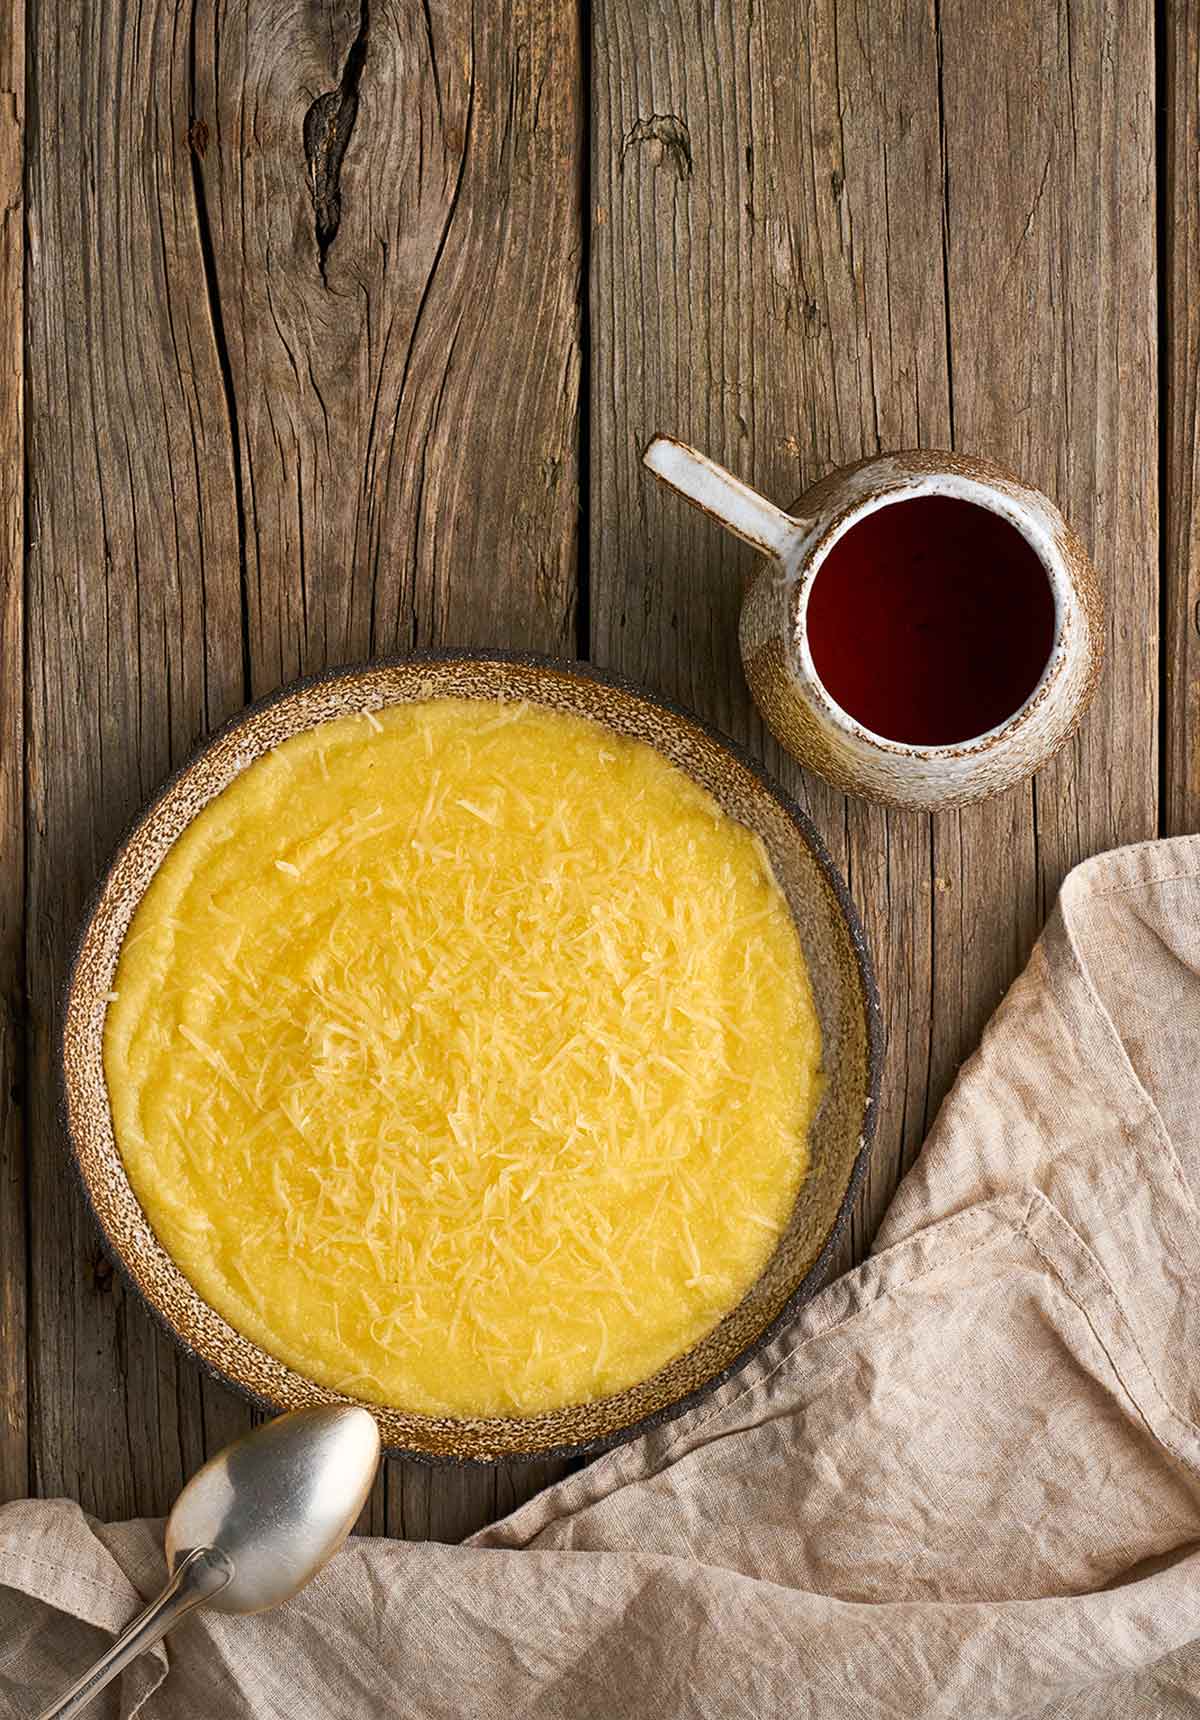 A bowl filled with basic polenta next to a mug of tea, a cloth, and a spoon resting on the side of the bowl.